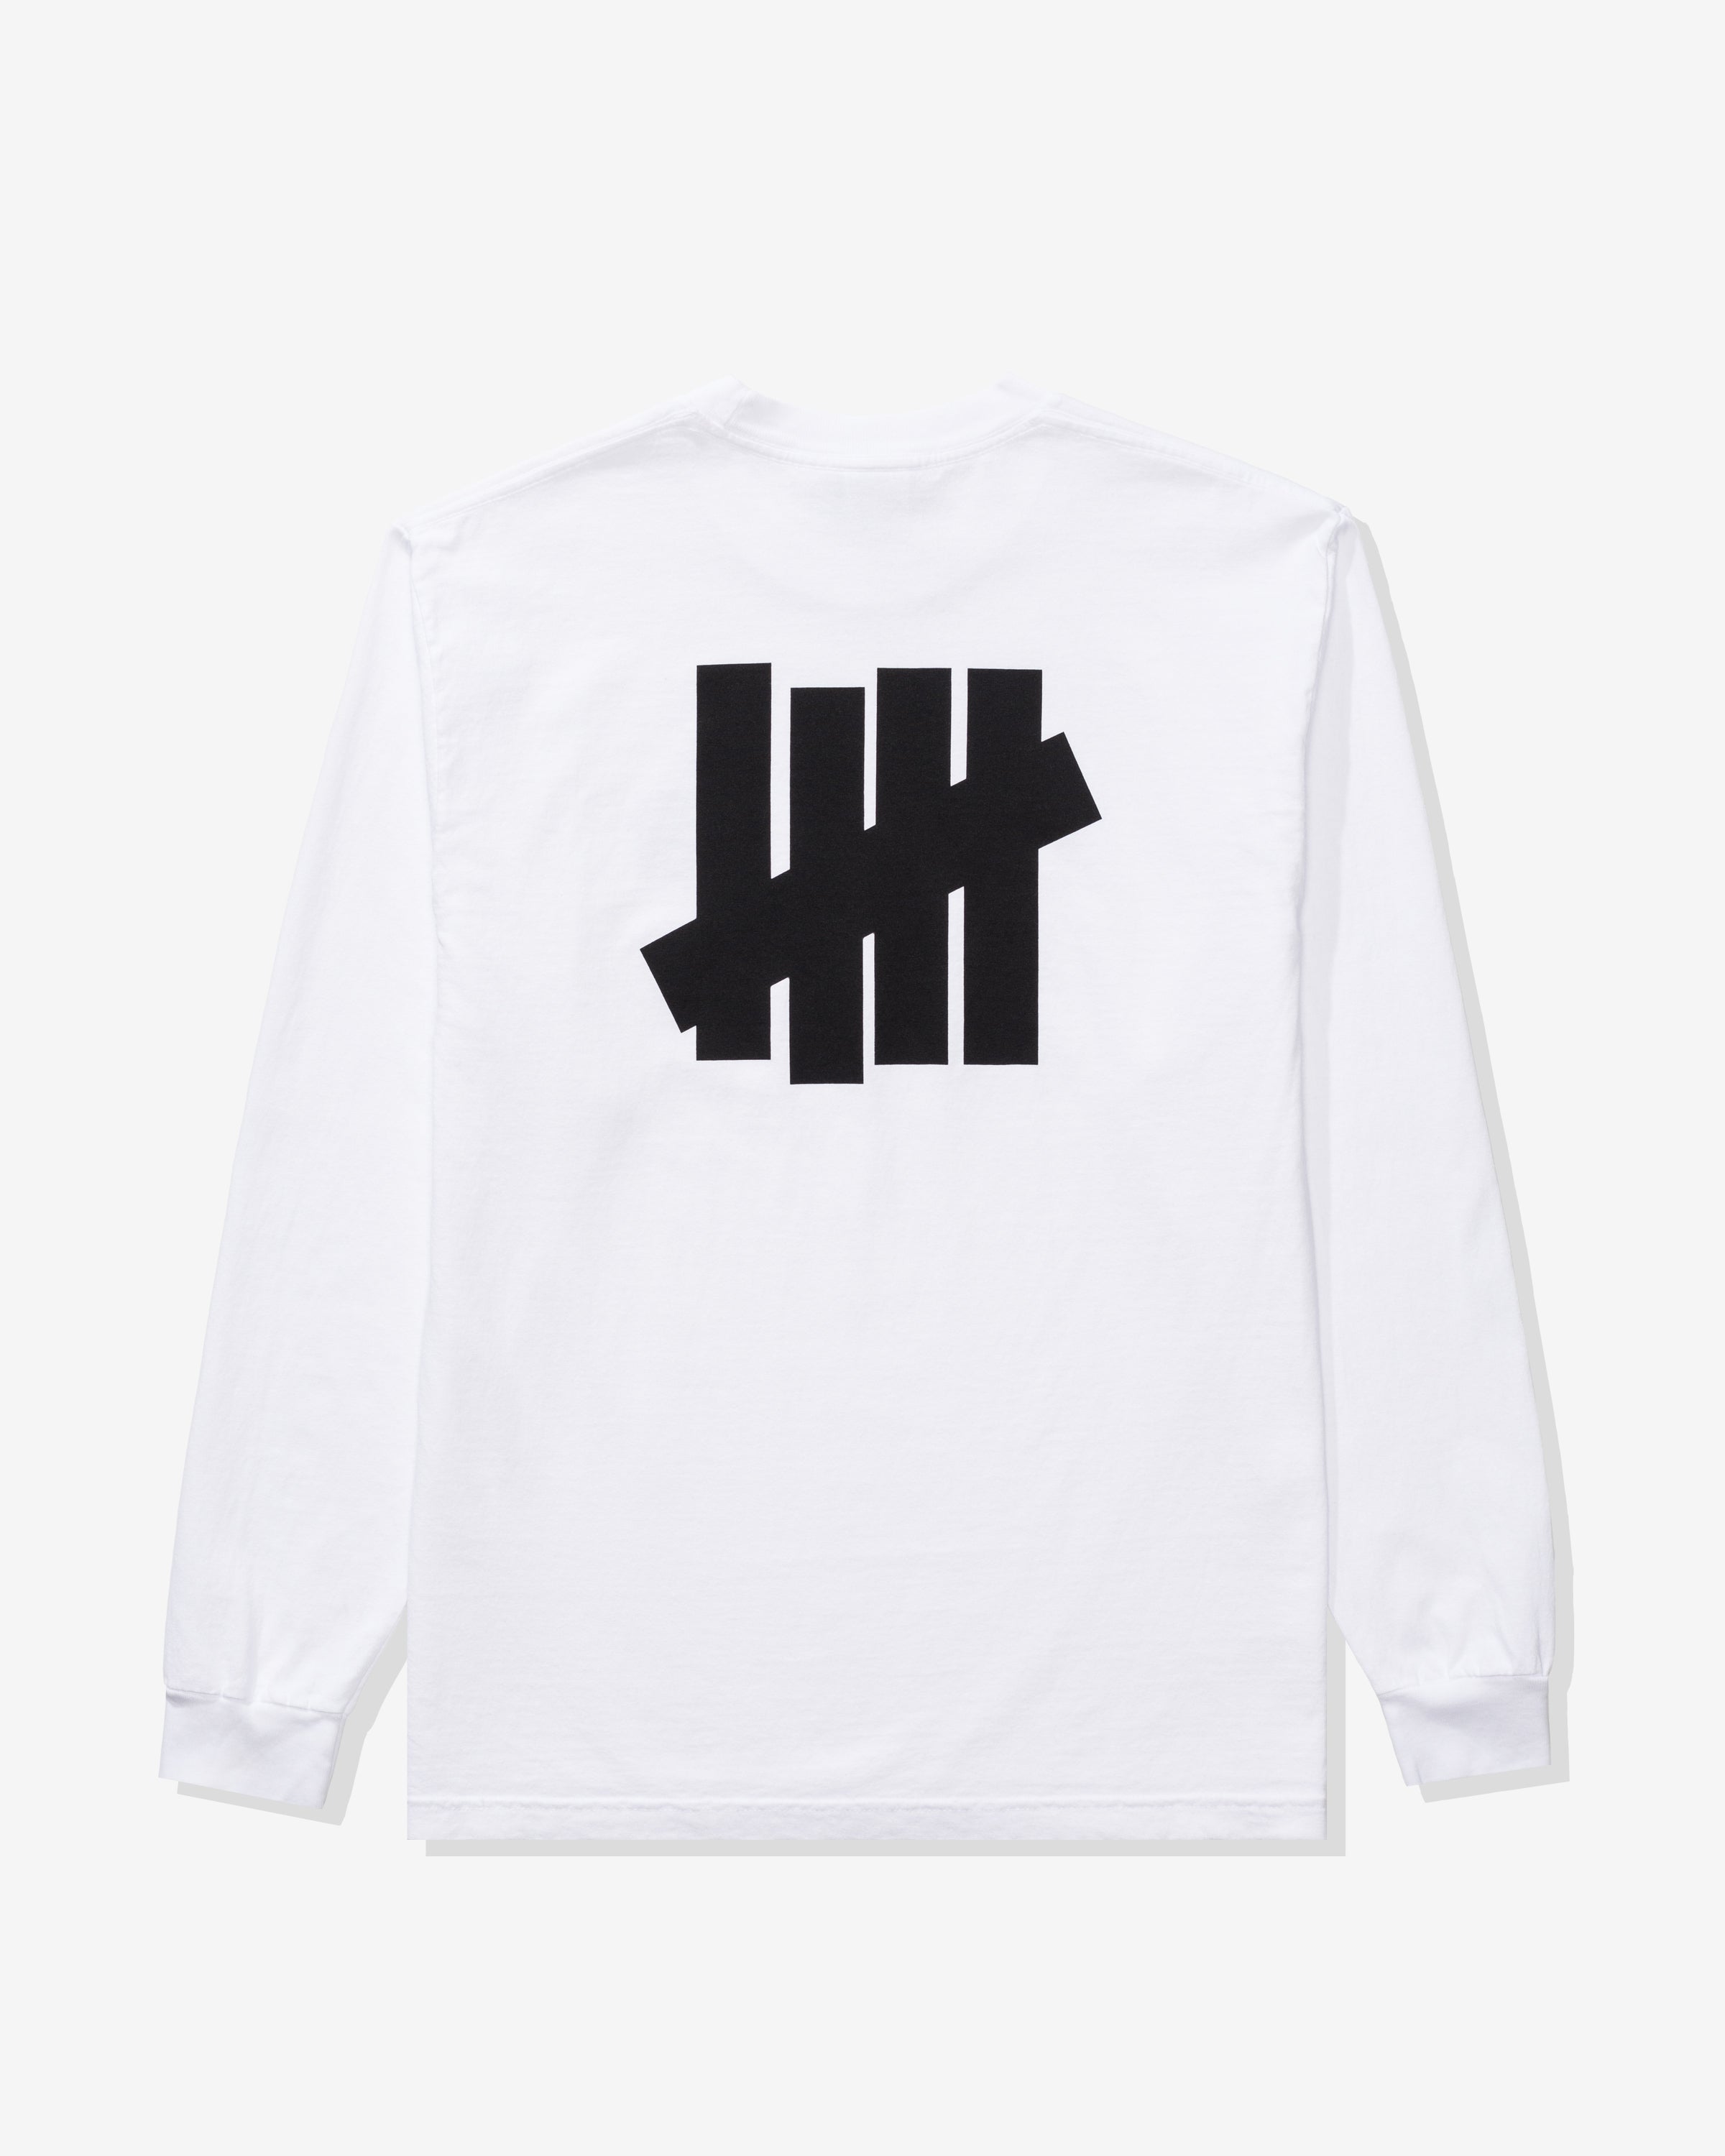 【2021SP】UNDEFEATED ICON L/S TEE - 80223